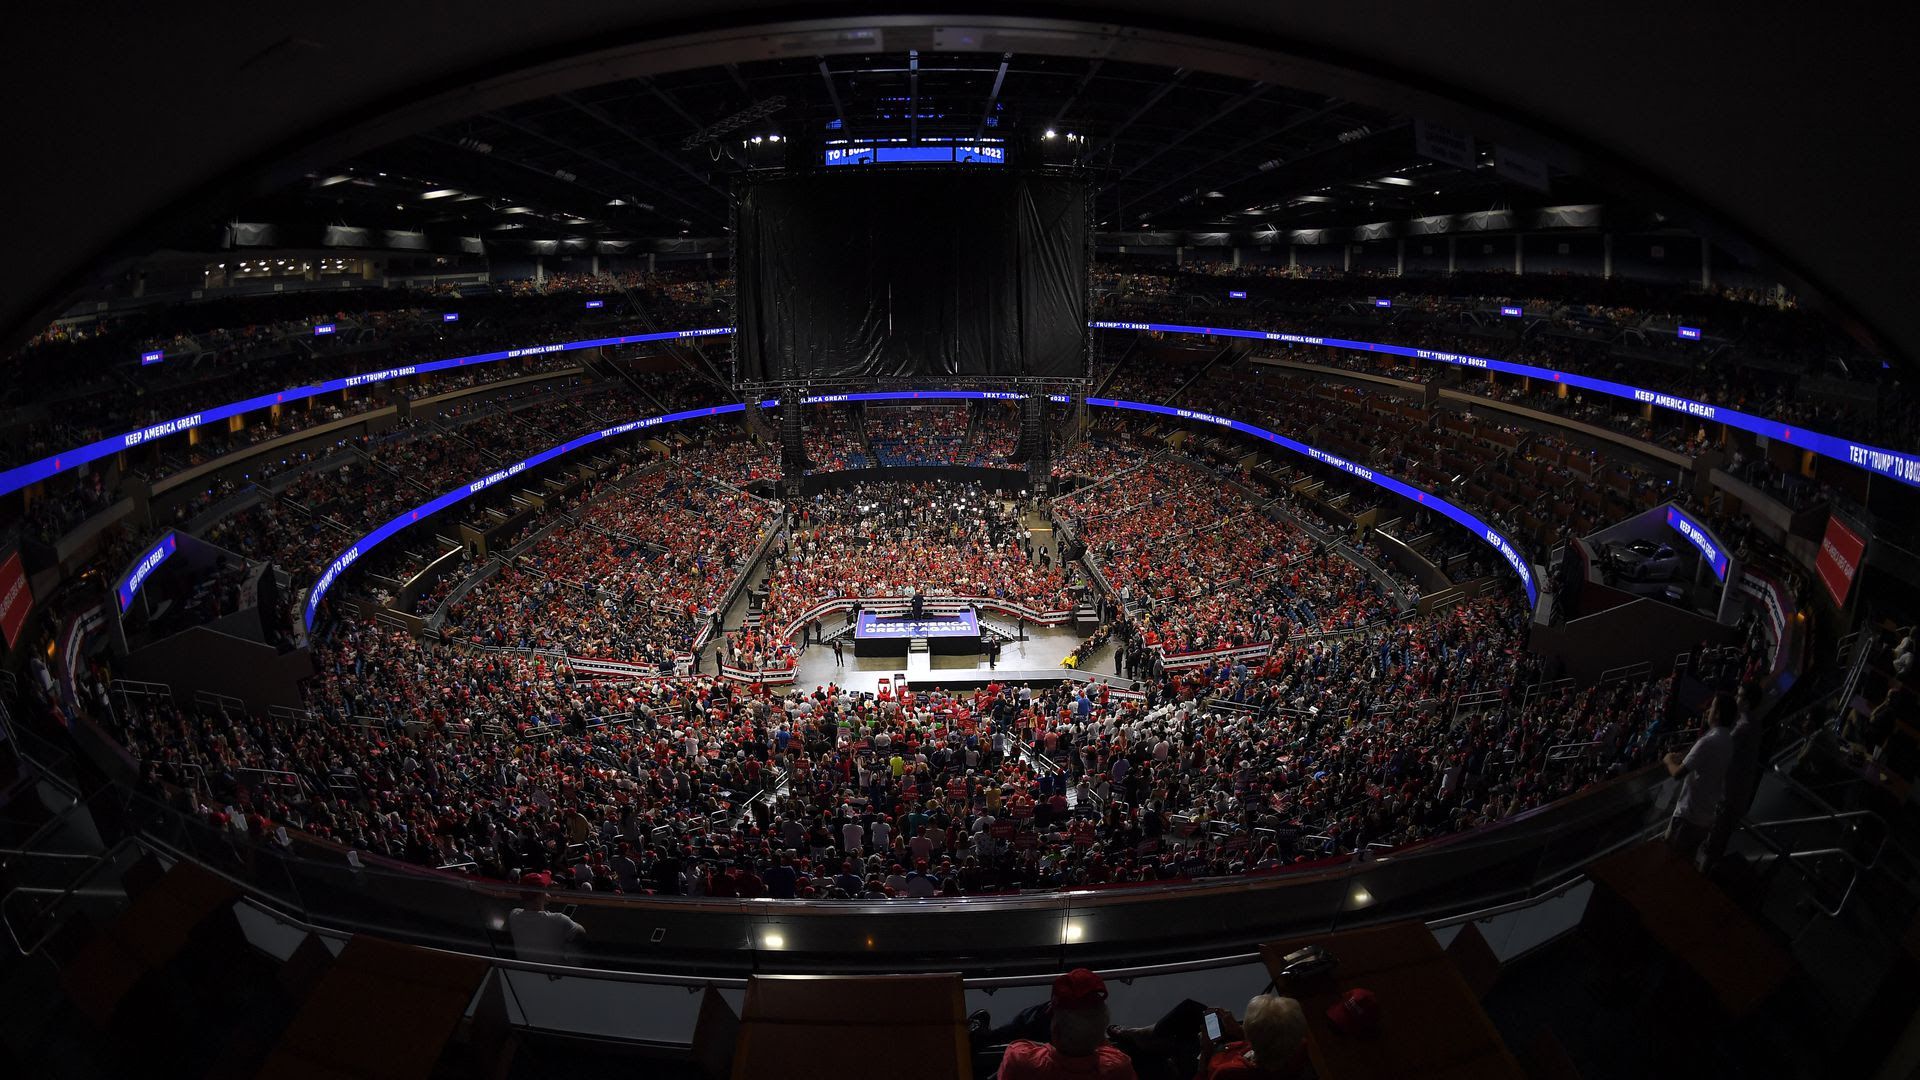 Trump speaks at the Amway Center in Orlando. (Photo: Mandel Ngan/AFP/Getty Images)